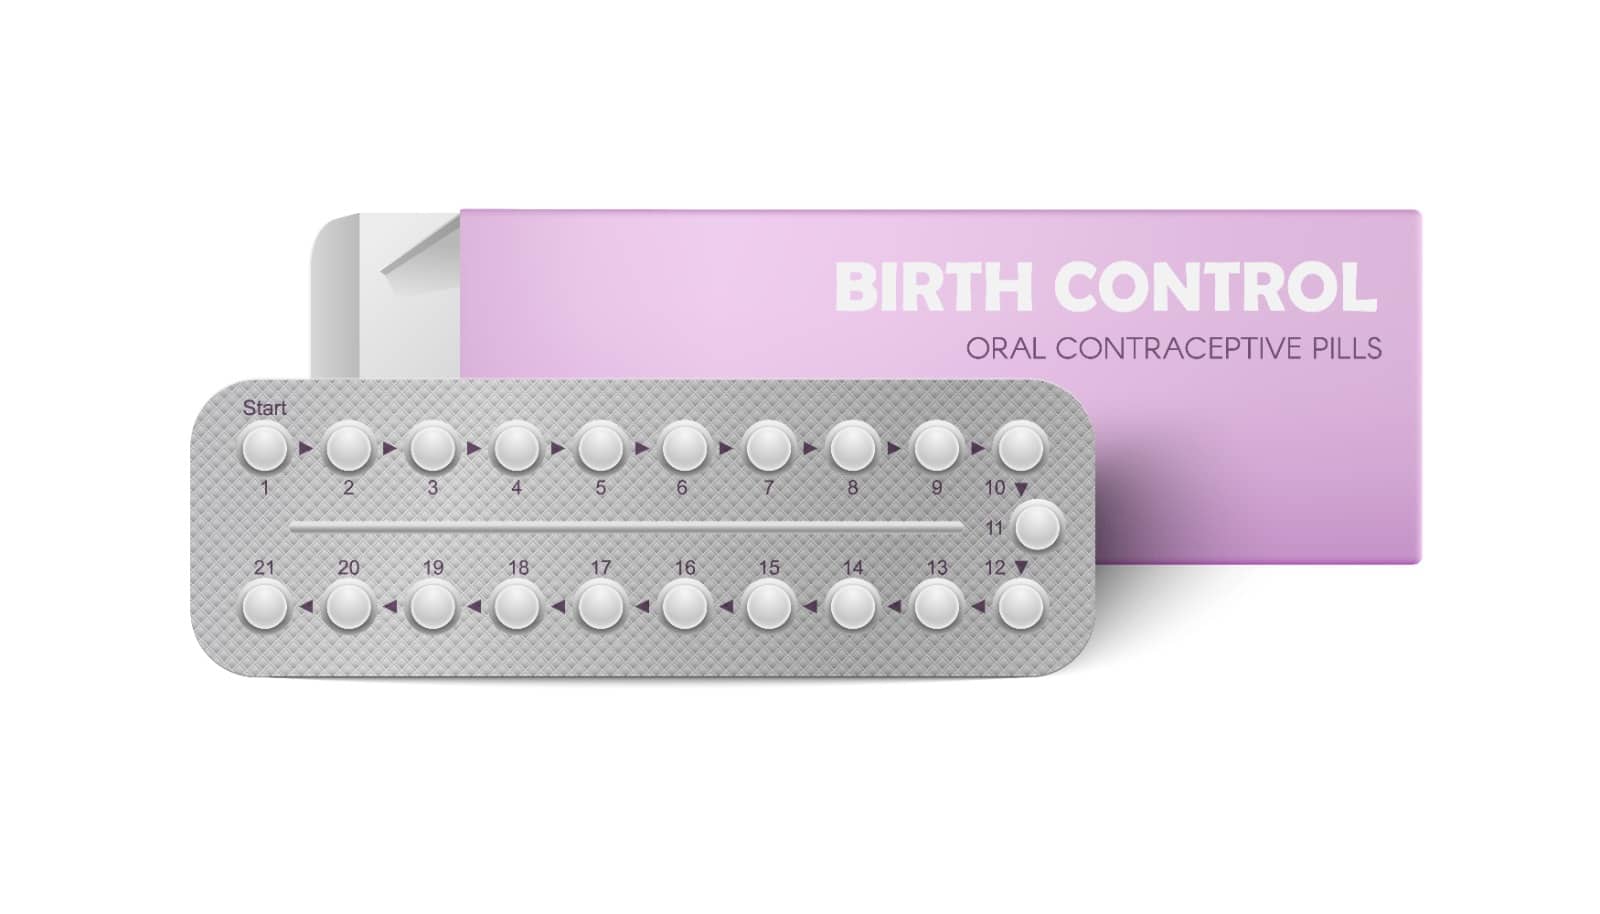 The ultimate guide to buying oral contraceptives online